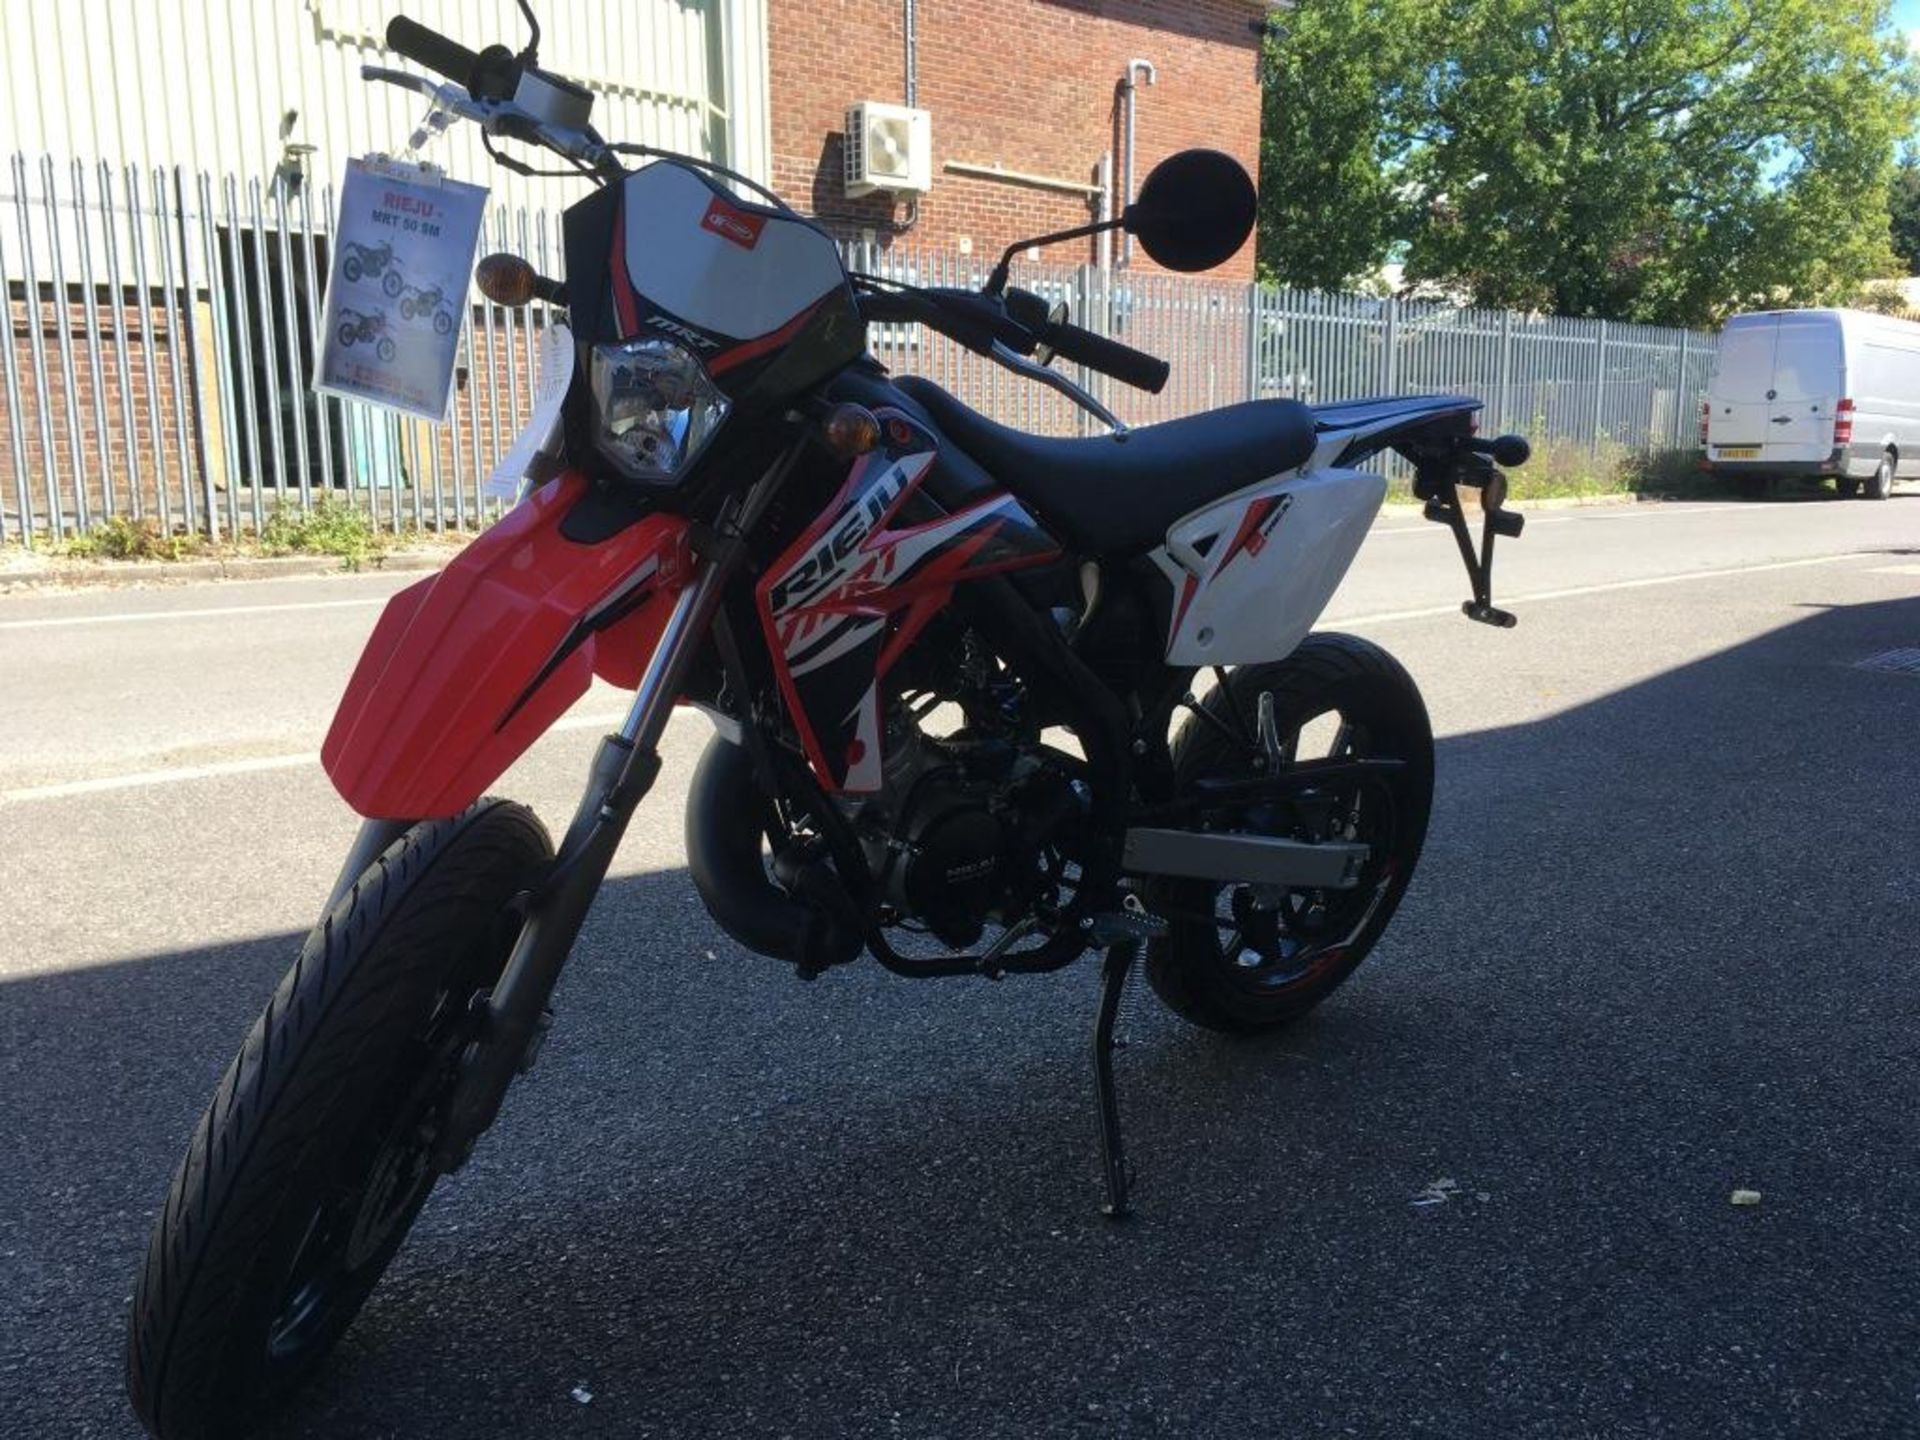 Rieju MRT 50 Supermotard motorcycle, Year of Manufacture: 2018, Registration number: Unregistered - Image 5 of 8